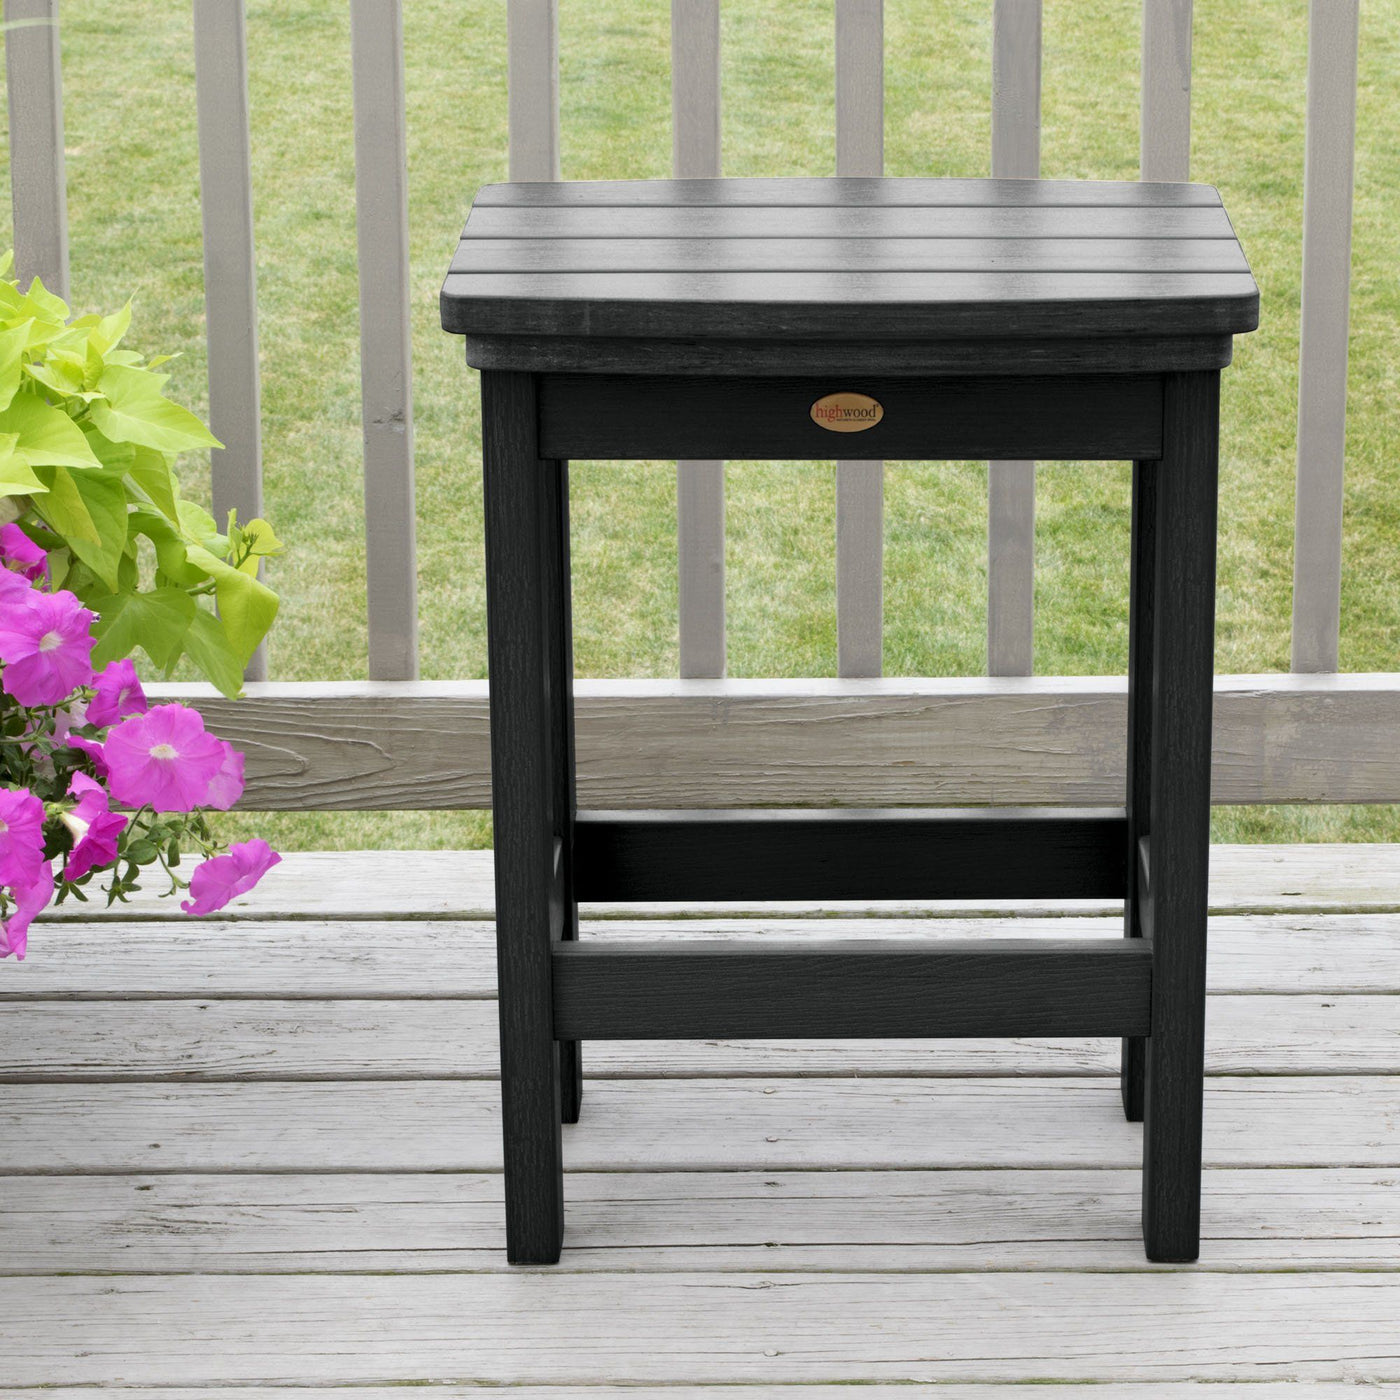 Black Lehigh counter height stool on deck with flowers in background